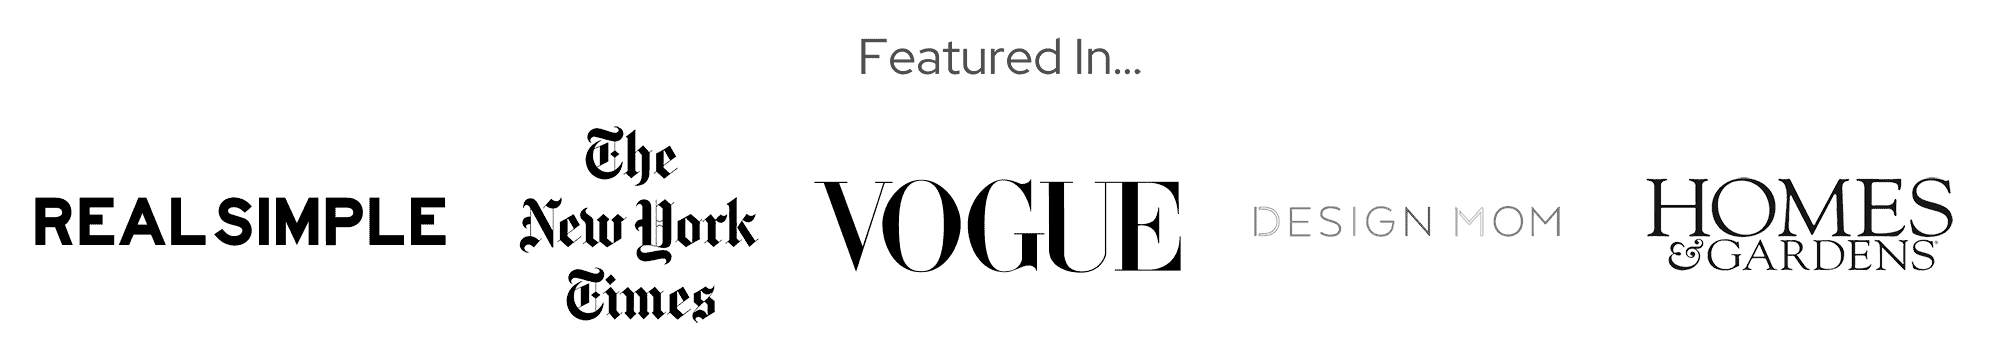 Color Guru has been featured in Real Simple, The New York Times, and Vogue